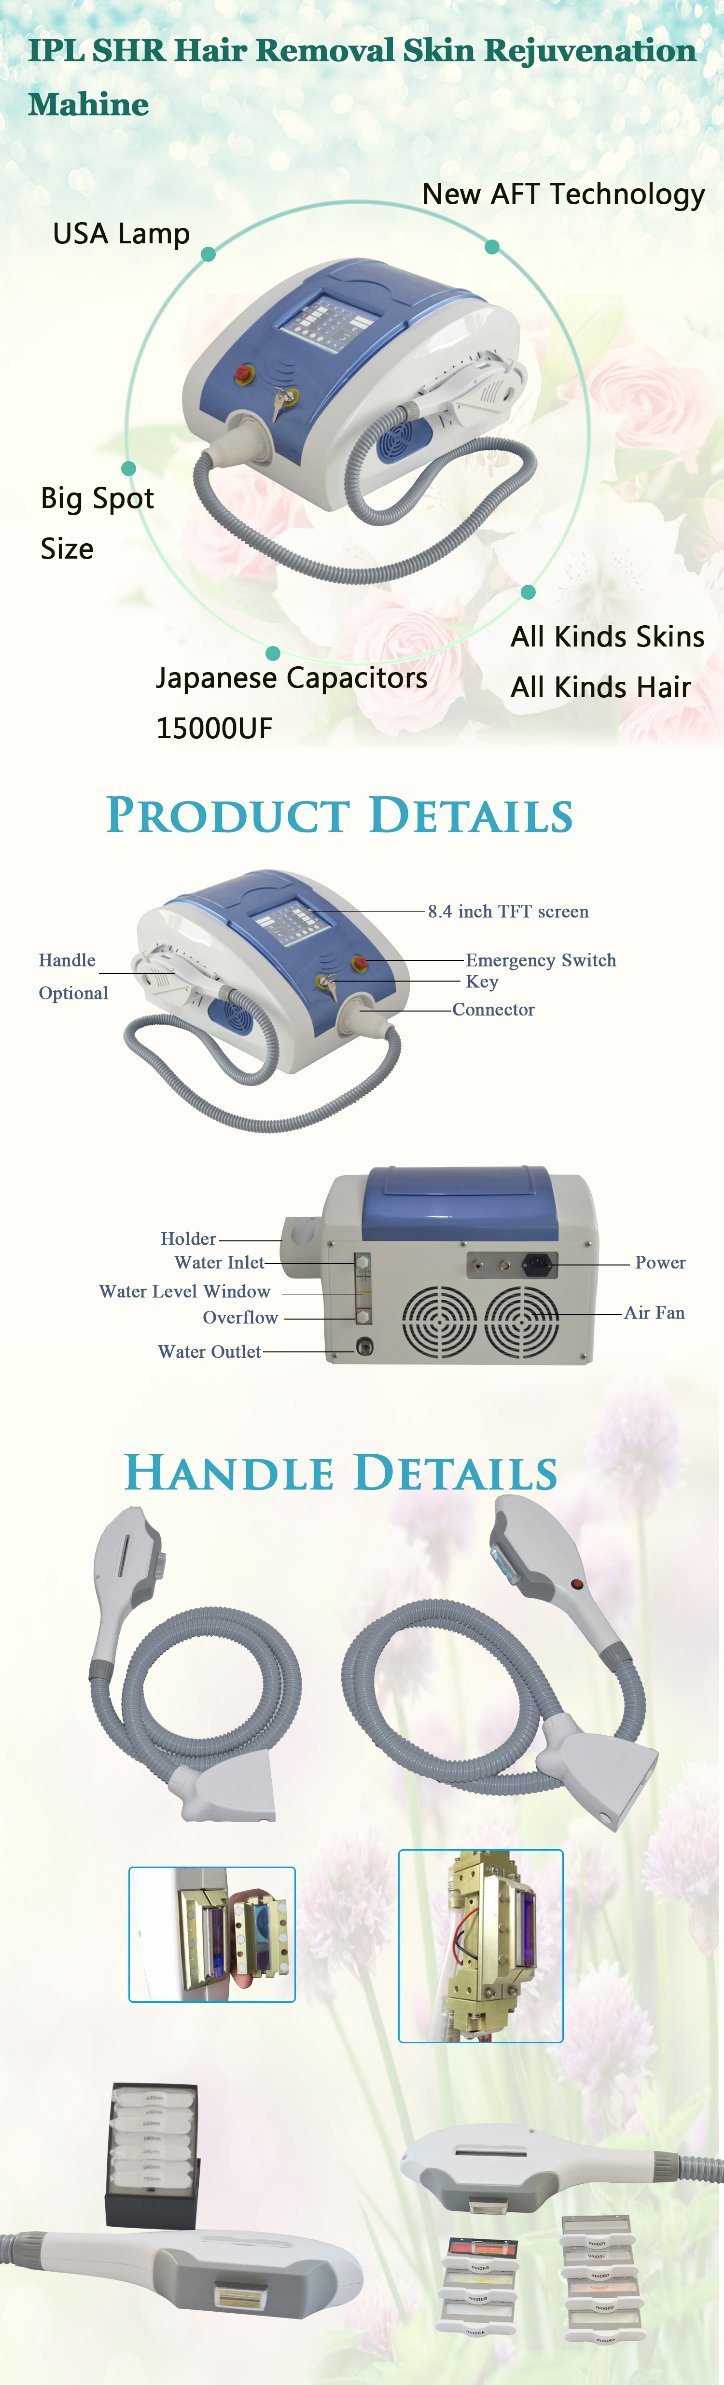 IPL Hair Removal and Skin Rejuvenation Beauty Machine